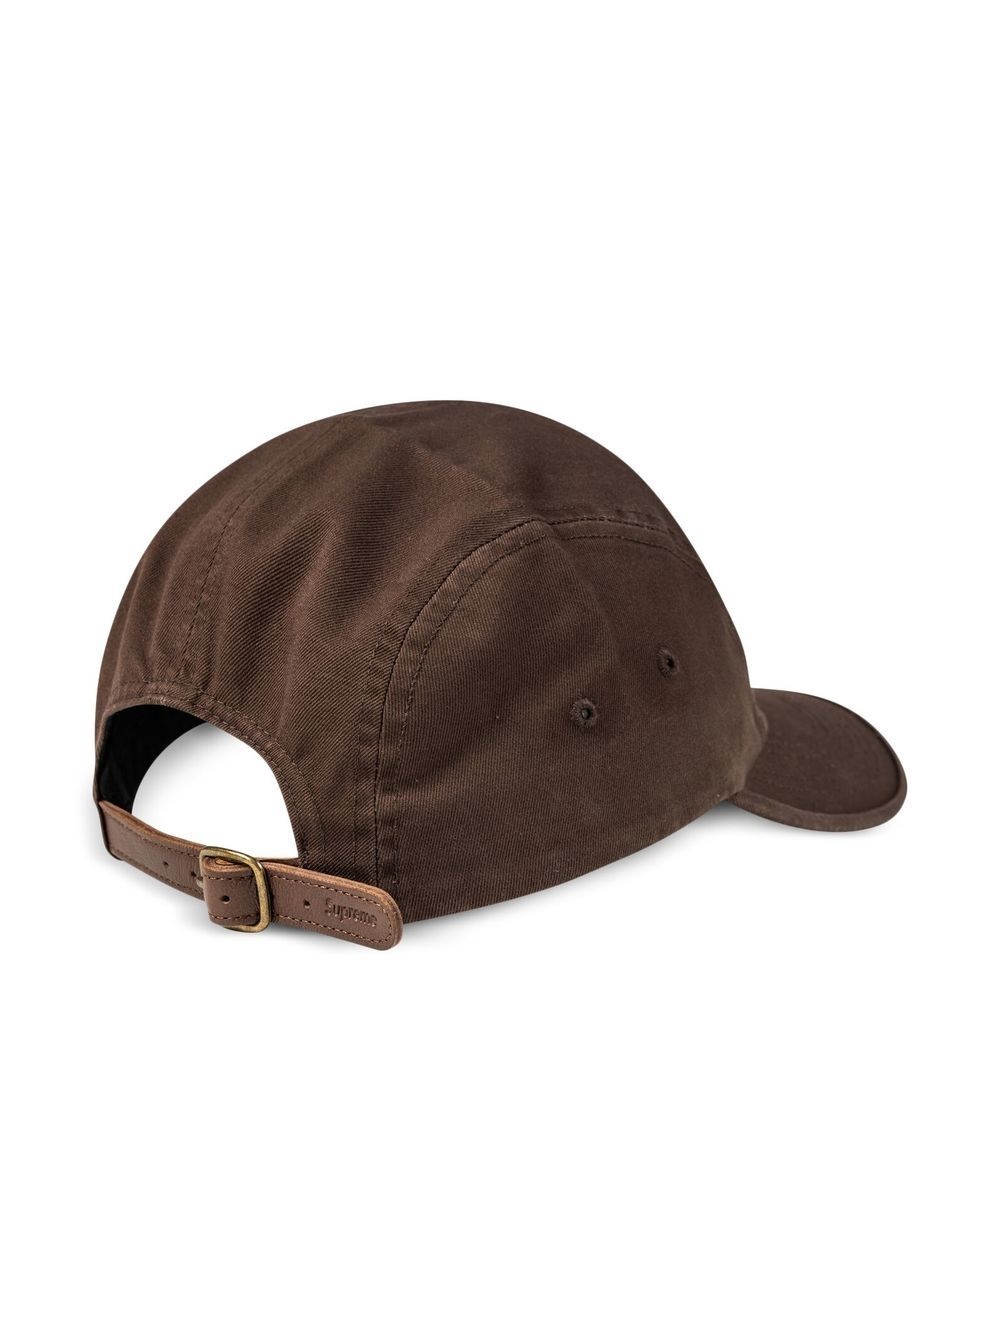 washed chino twill camp cap - 3